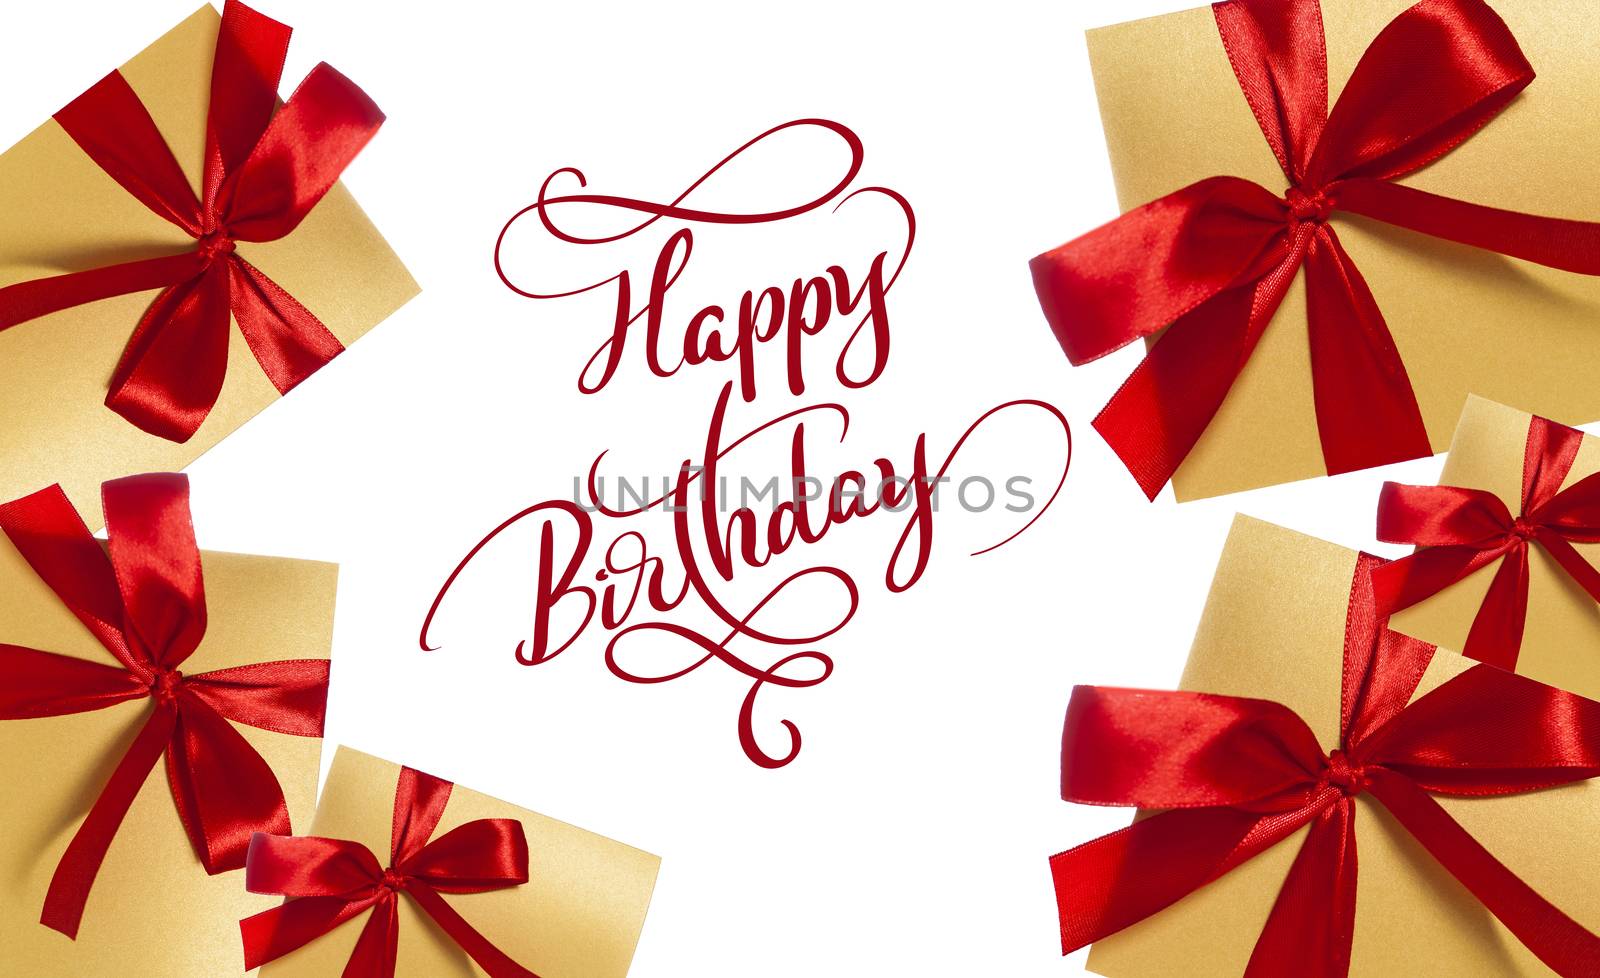 background for greeting card boxes with red bow and text Happy Birthday. Calligraphy lettering by timonko